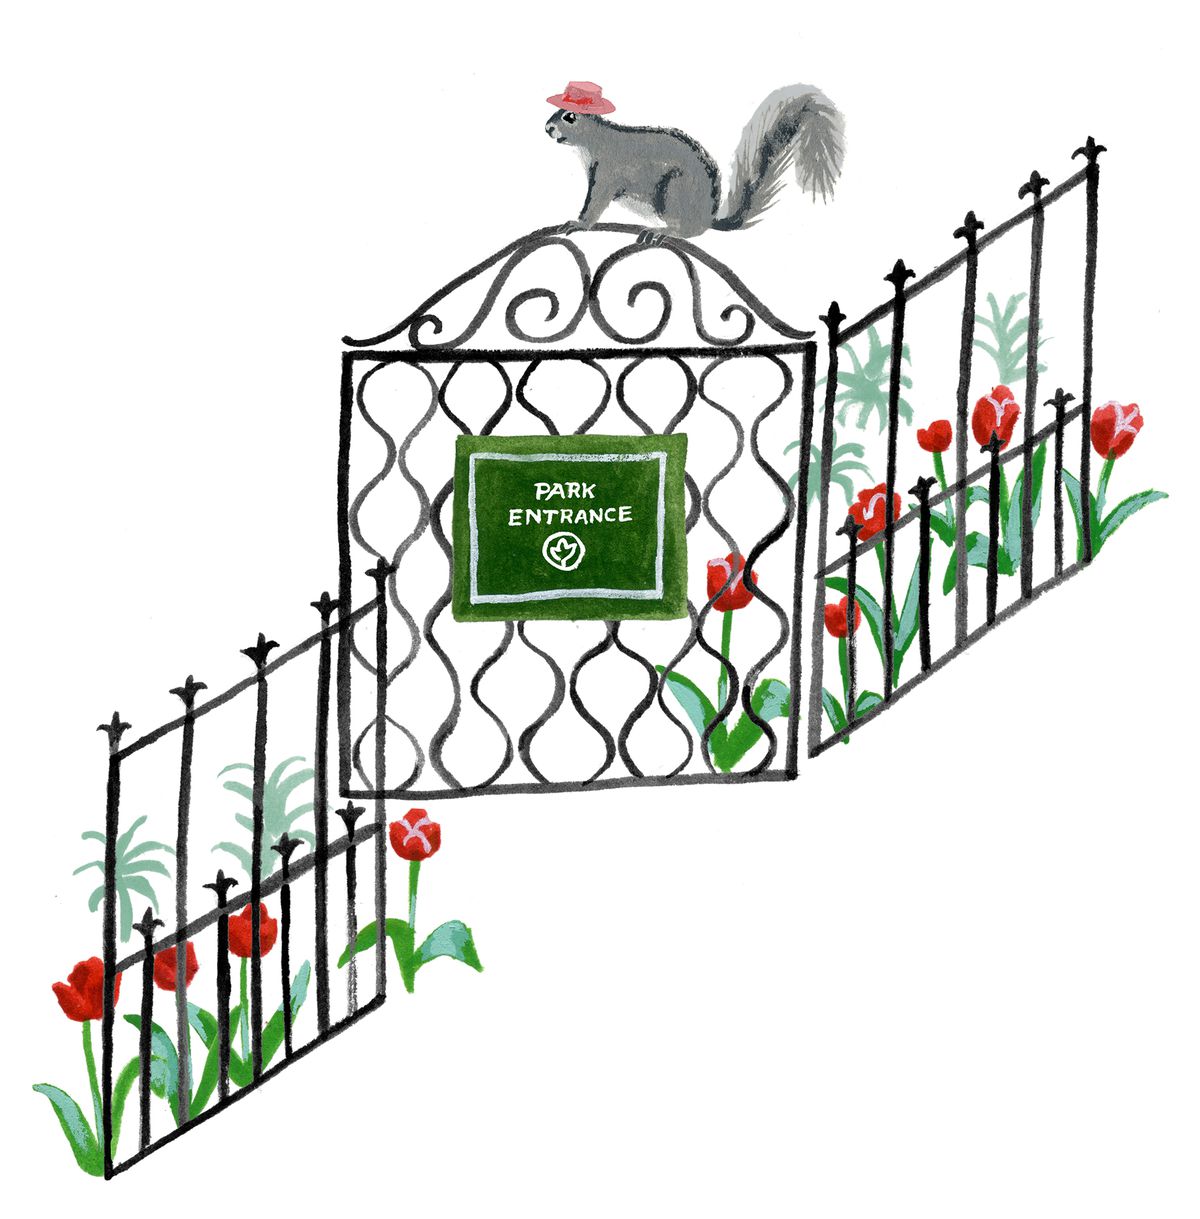 An illustration of a squirrel wearing a red hat and perching atop a decorative wrought-iron gate with a green “Park Entrance” sign. Red tulips grow along the fence-line.